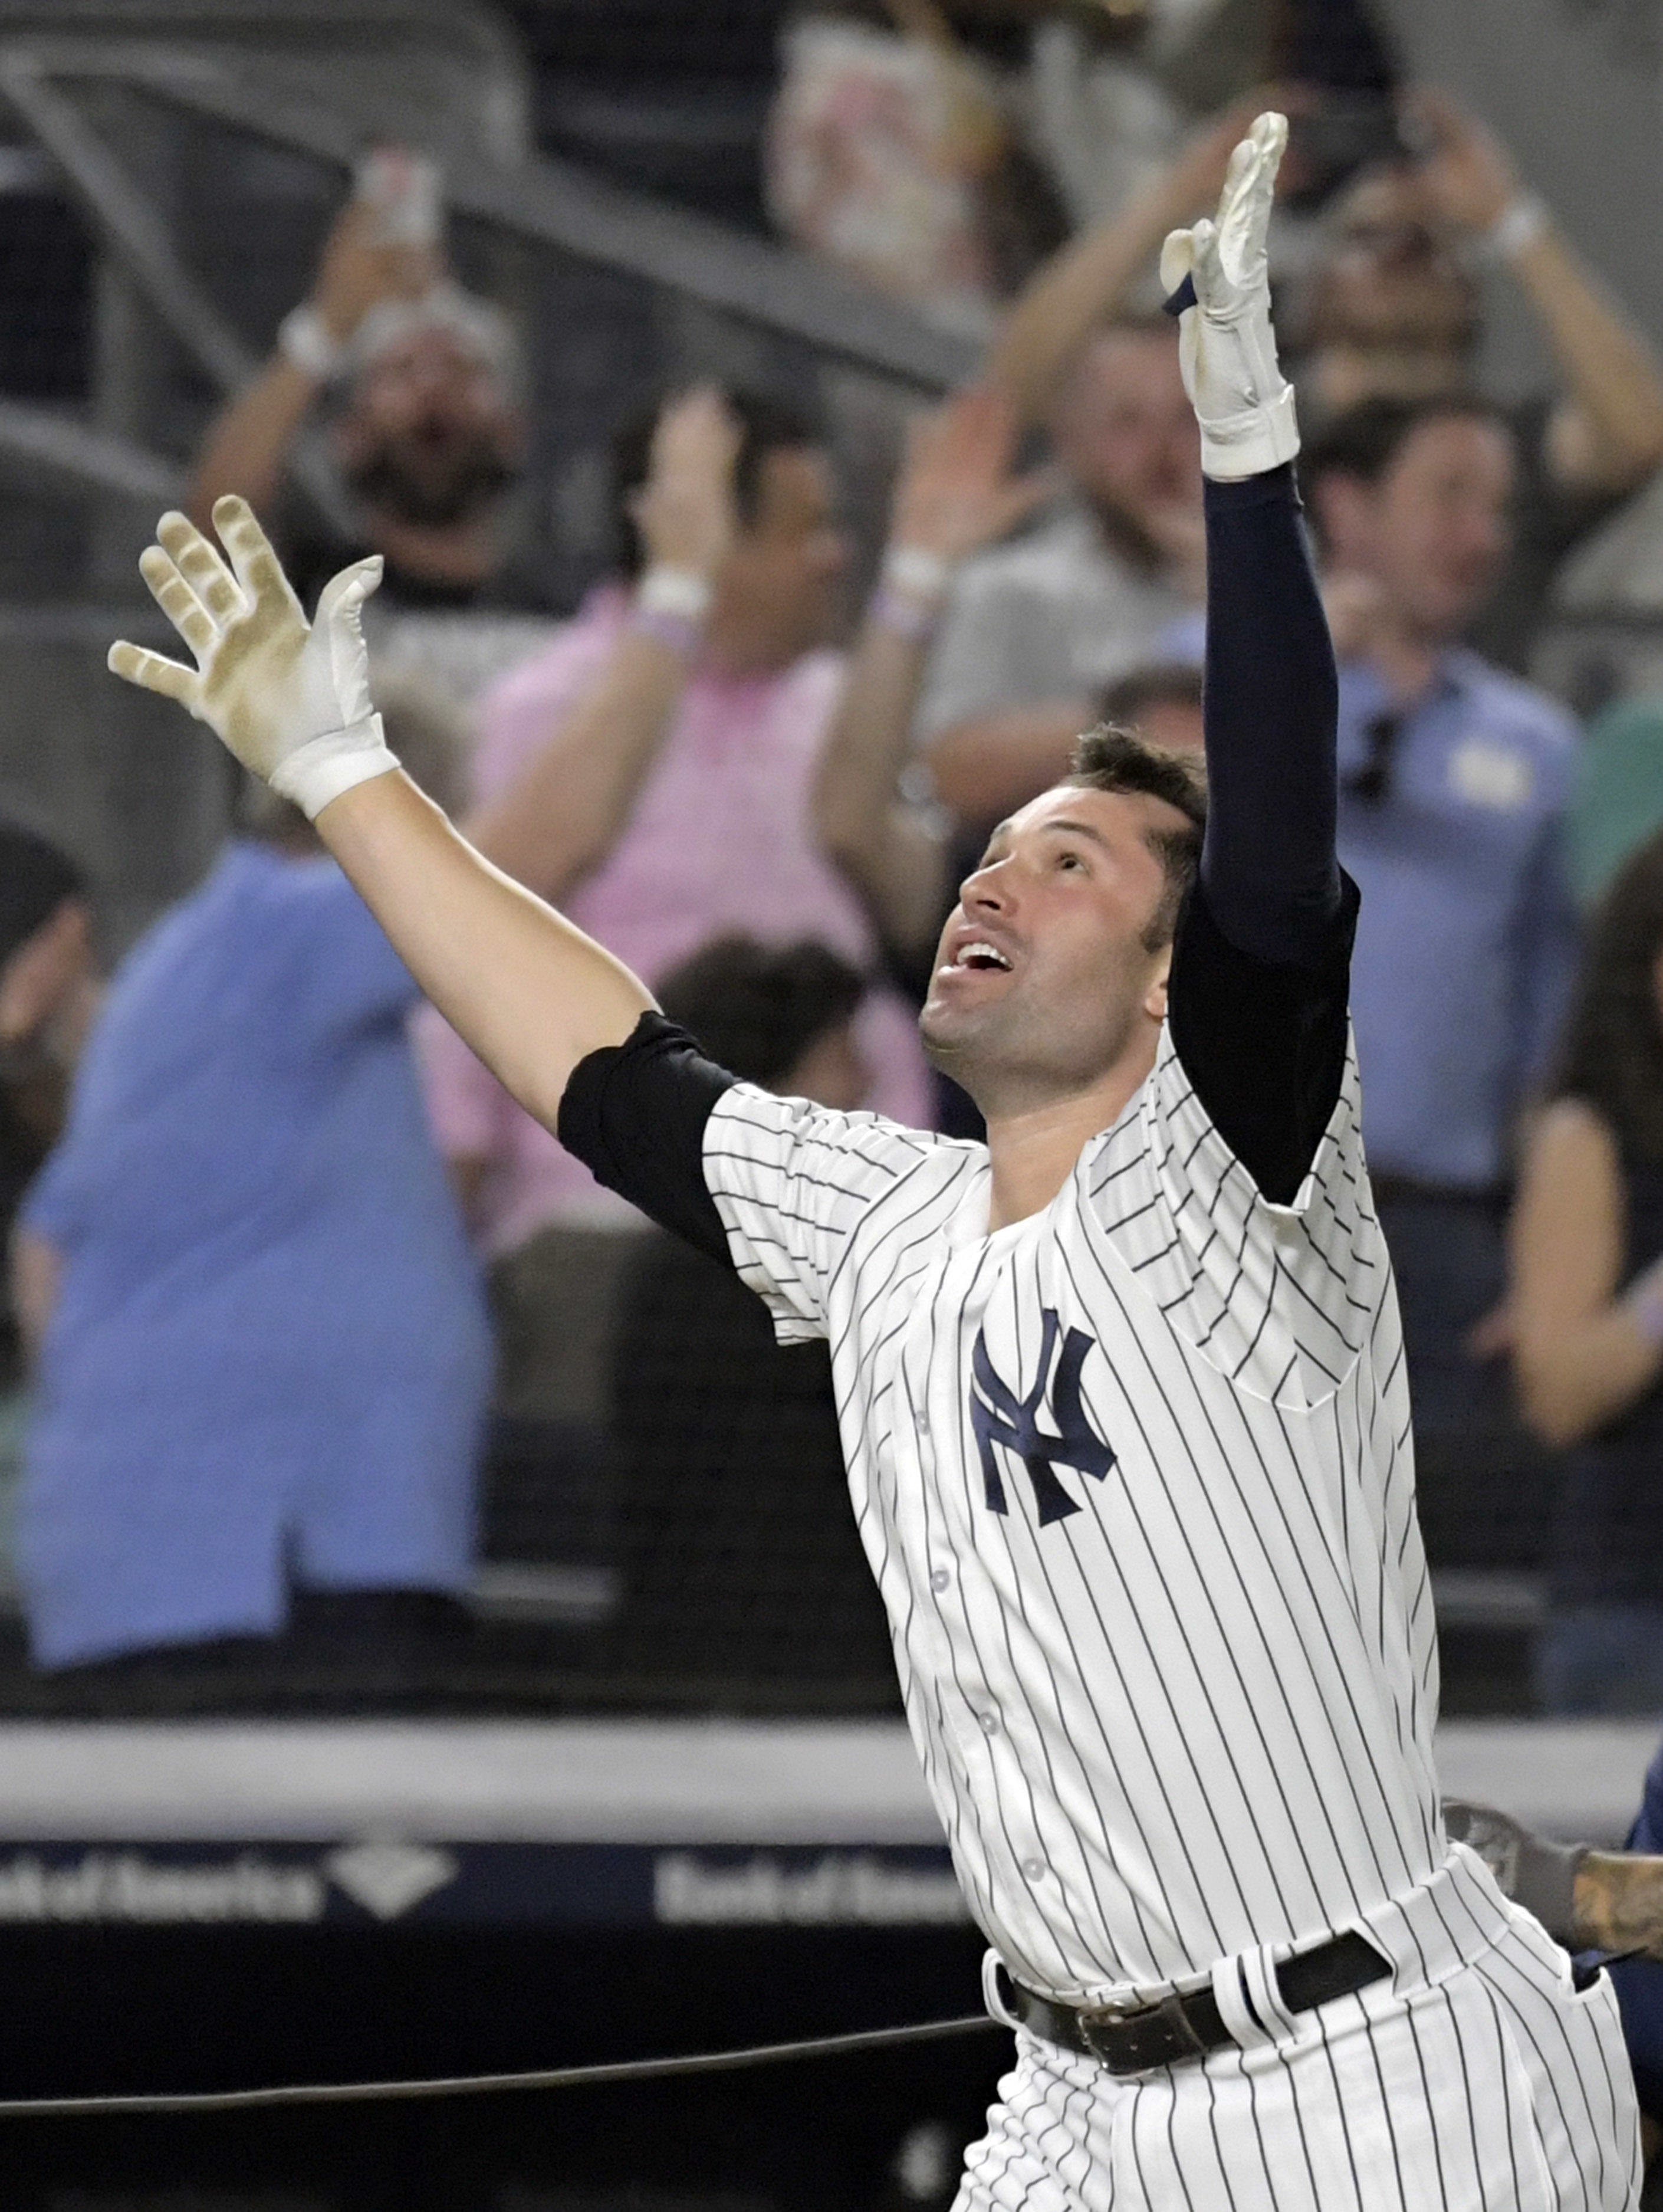 Walker has pinch-hit HR in 9th, Yanks rally past White Sox